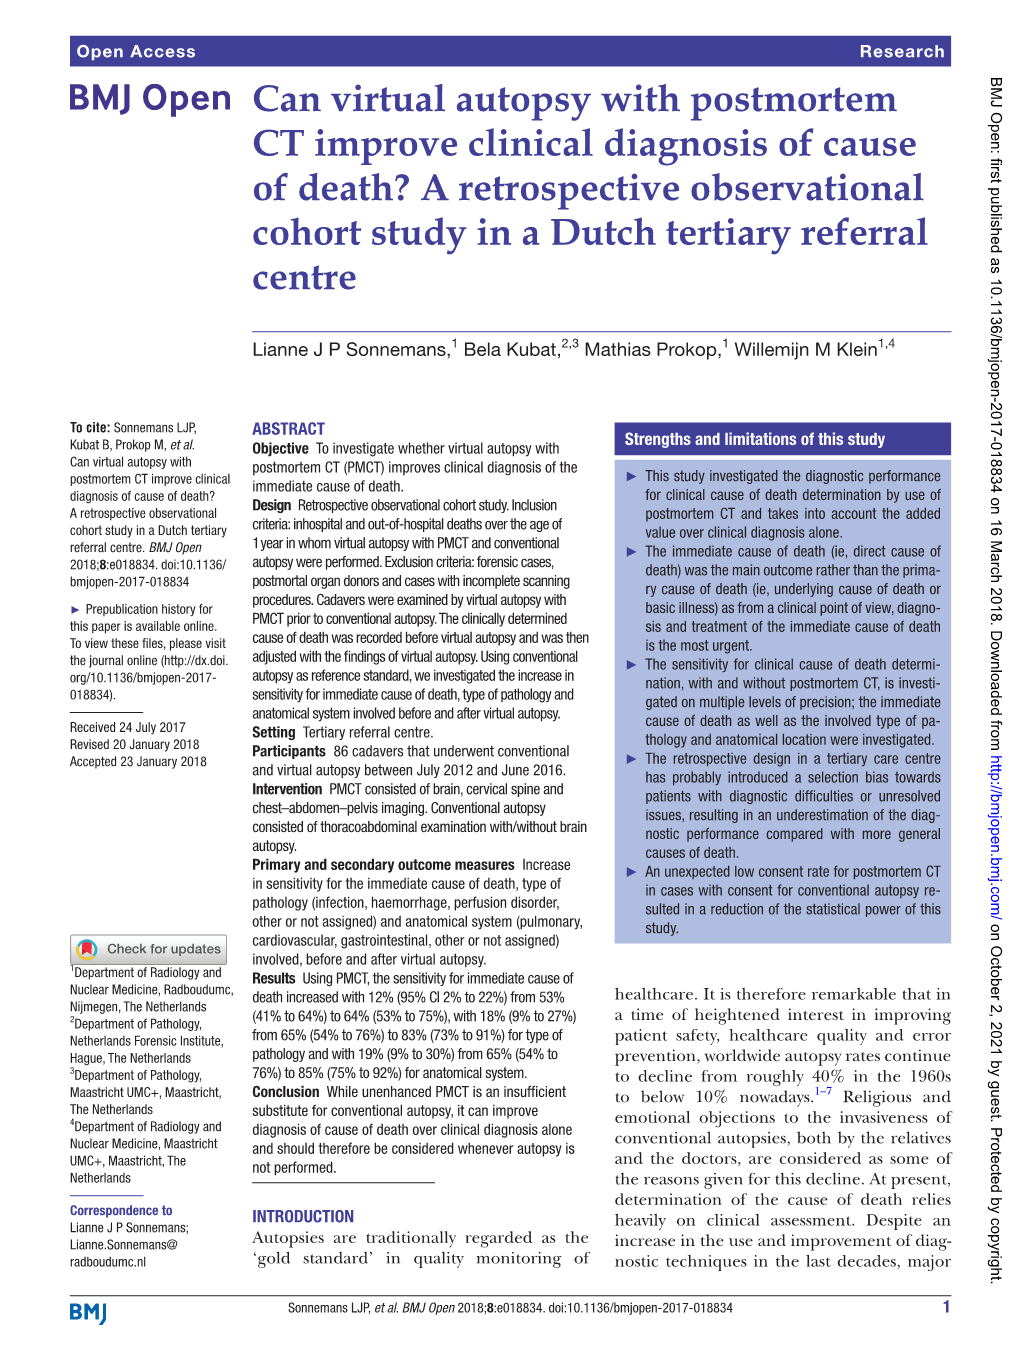 Can Virtual Autopsy with Postmortem CT Improve Clinical Diagnosis of Cause of Death? a Retrospective Observational Cohort Study in a Dutch Tertiary Referral Centre